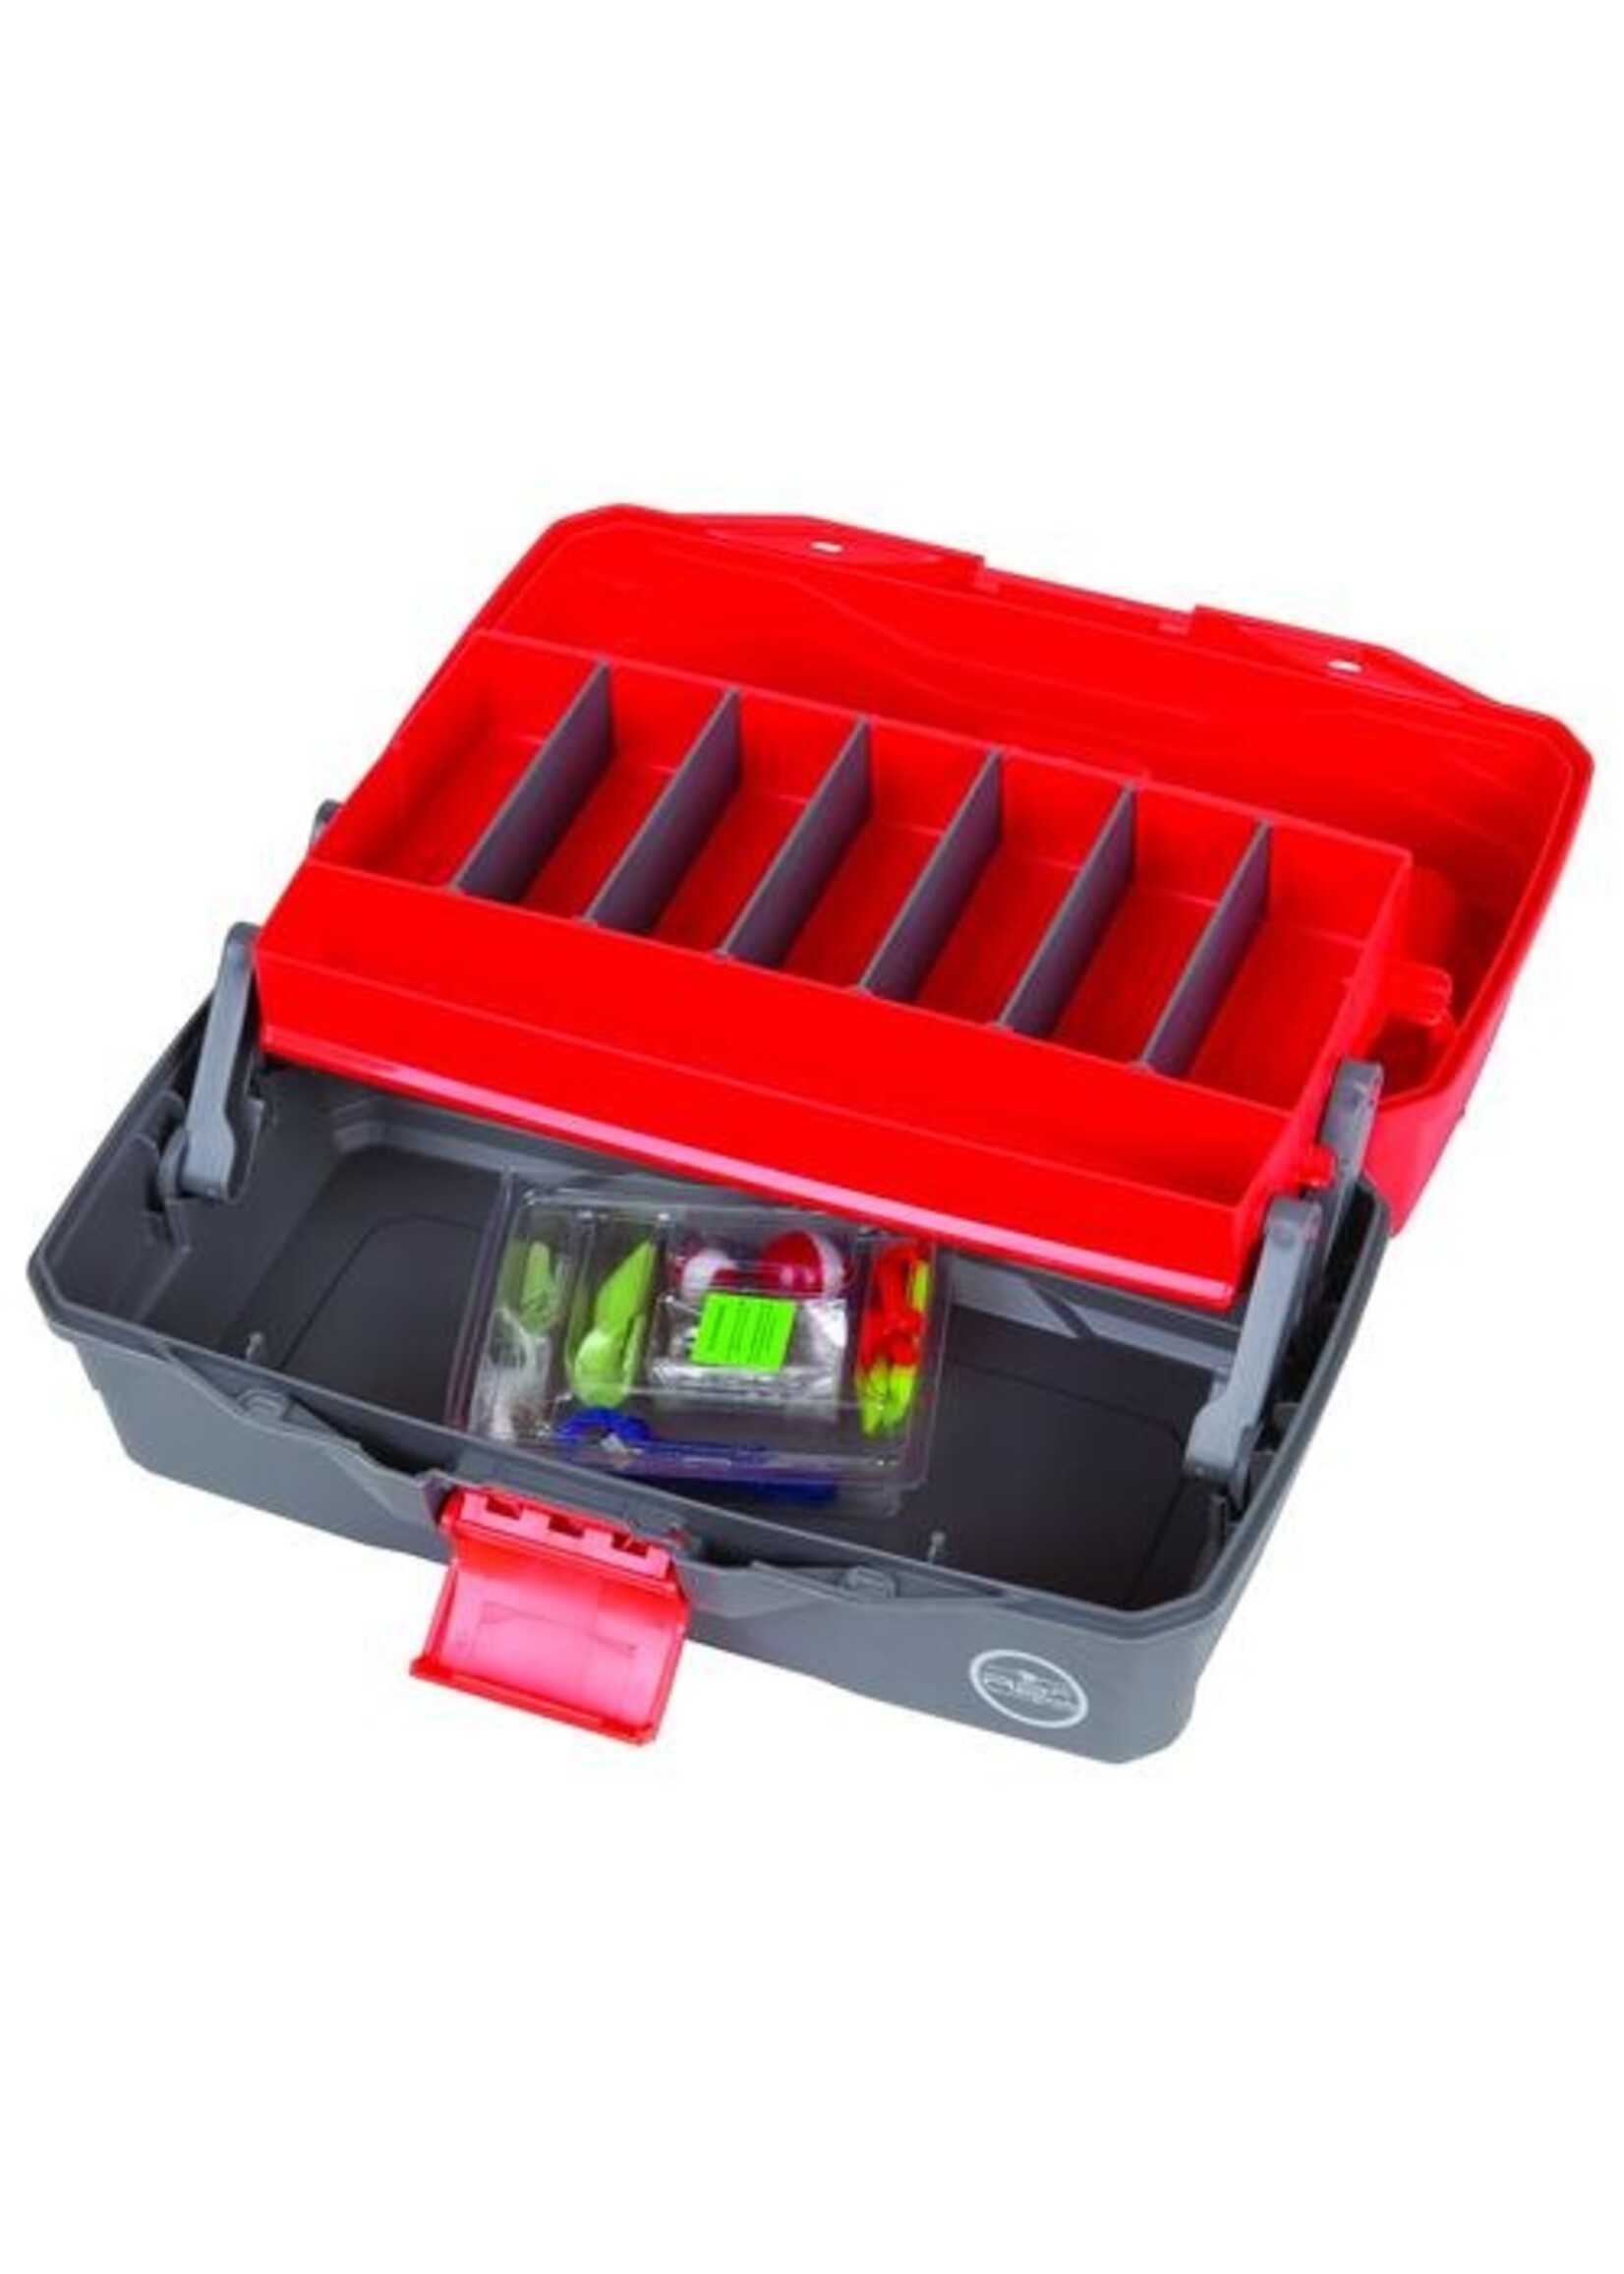 South Bend South Bend Ready2Fish 1 Tray 62 Piece Tackle Box